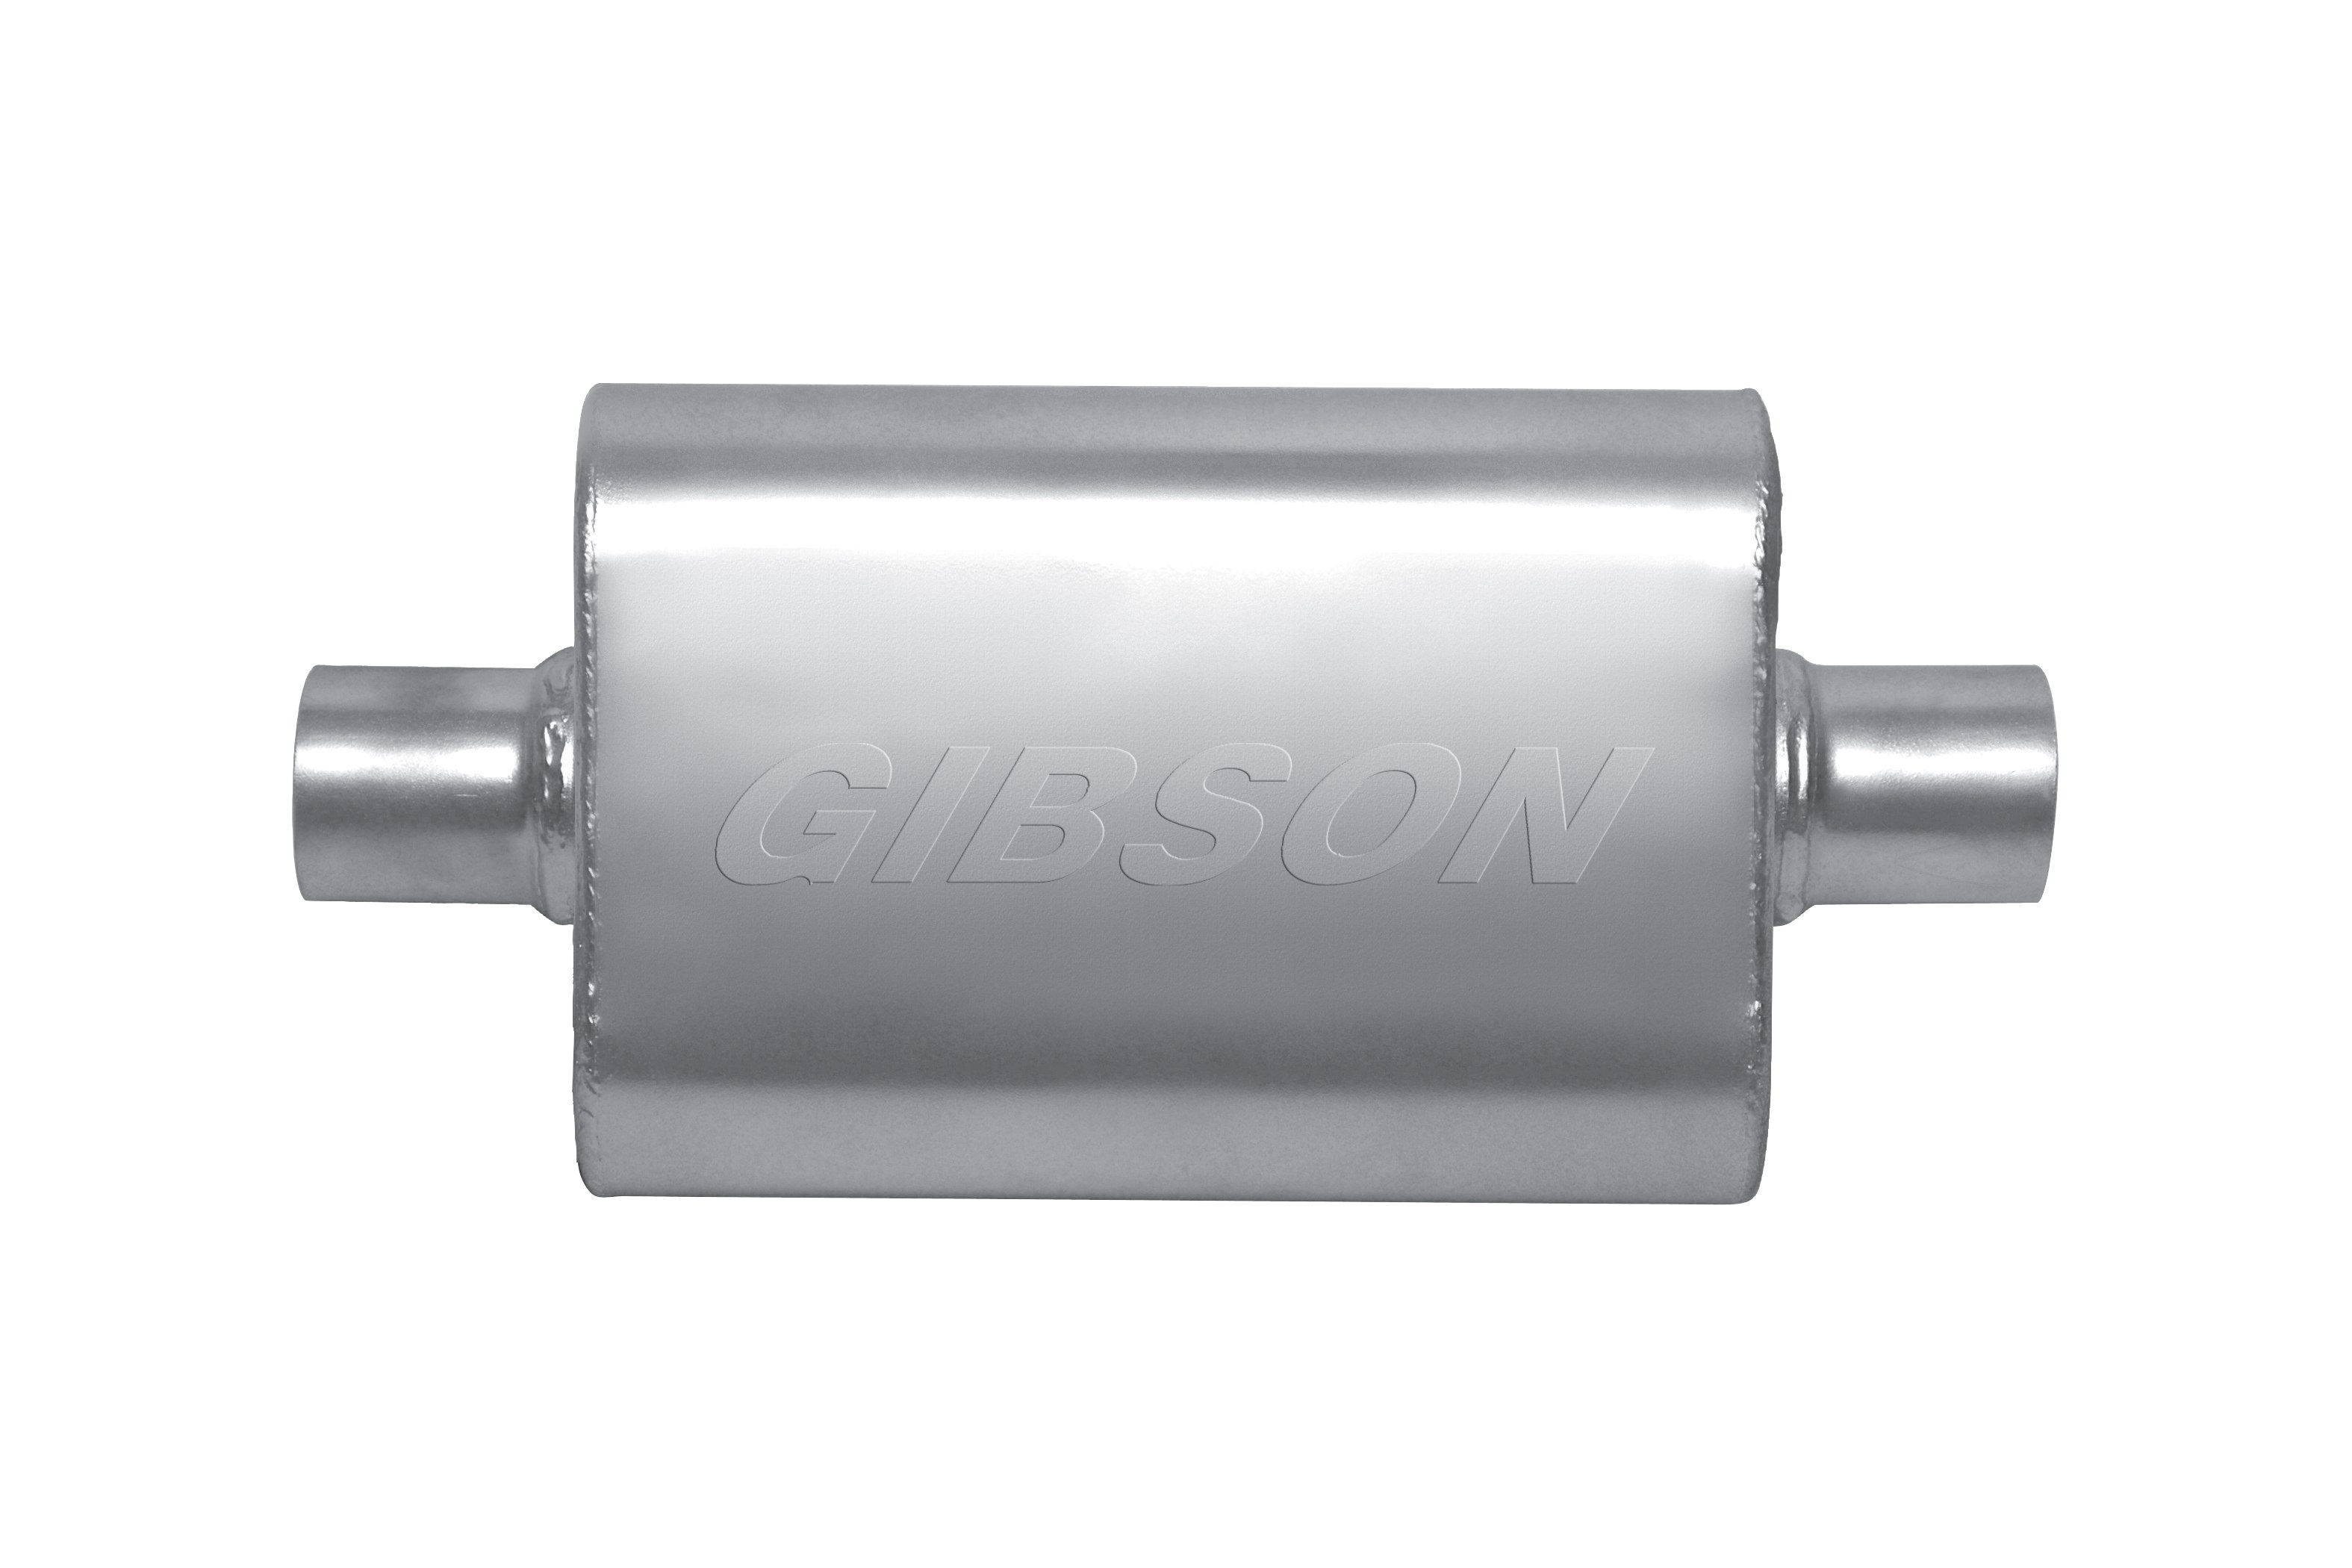 Gibson Exhaust BM0102 Muffler, MWA, 3 in Center Inlet, 3 in Offset Outlet, 9 in Diameter Body, 14 in Long, Stainless, Universal, Each